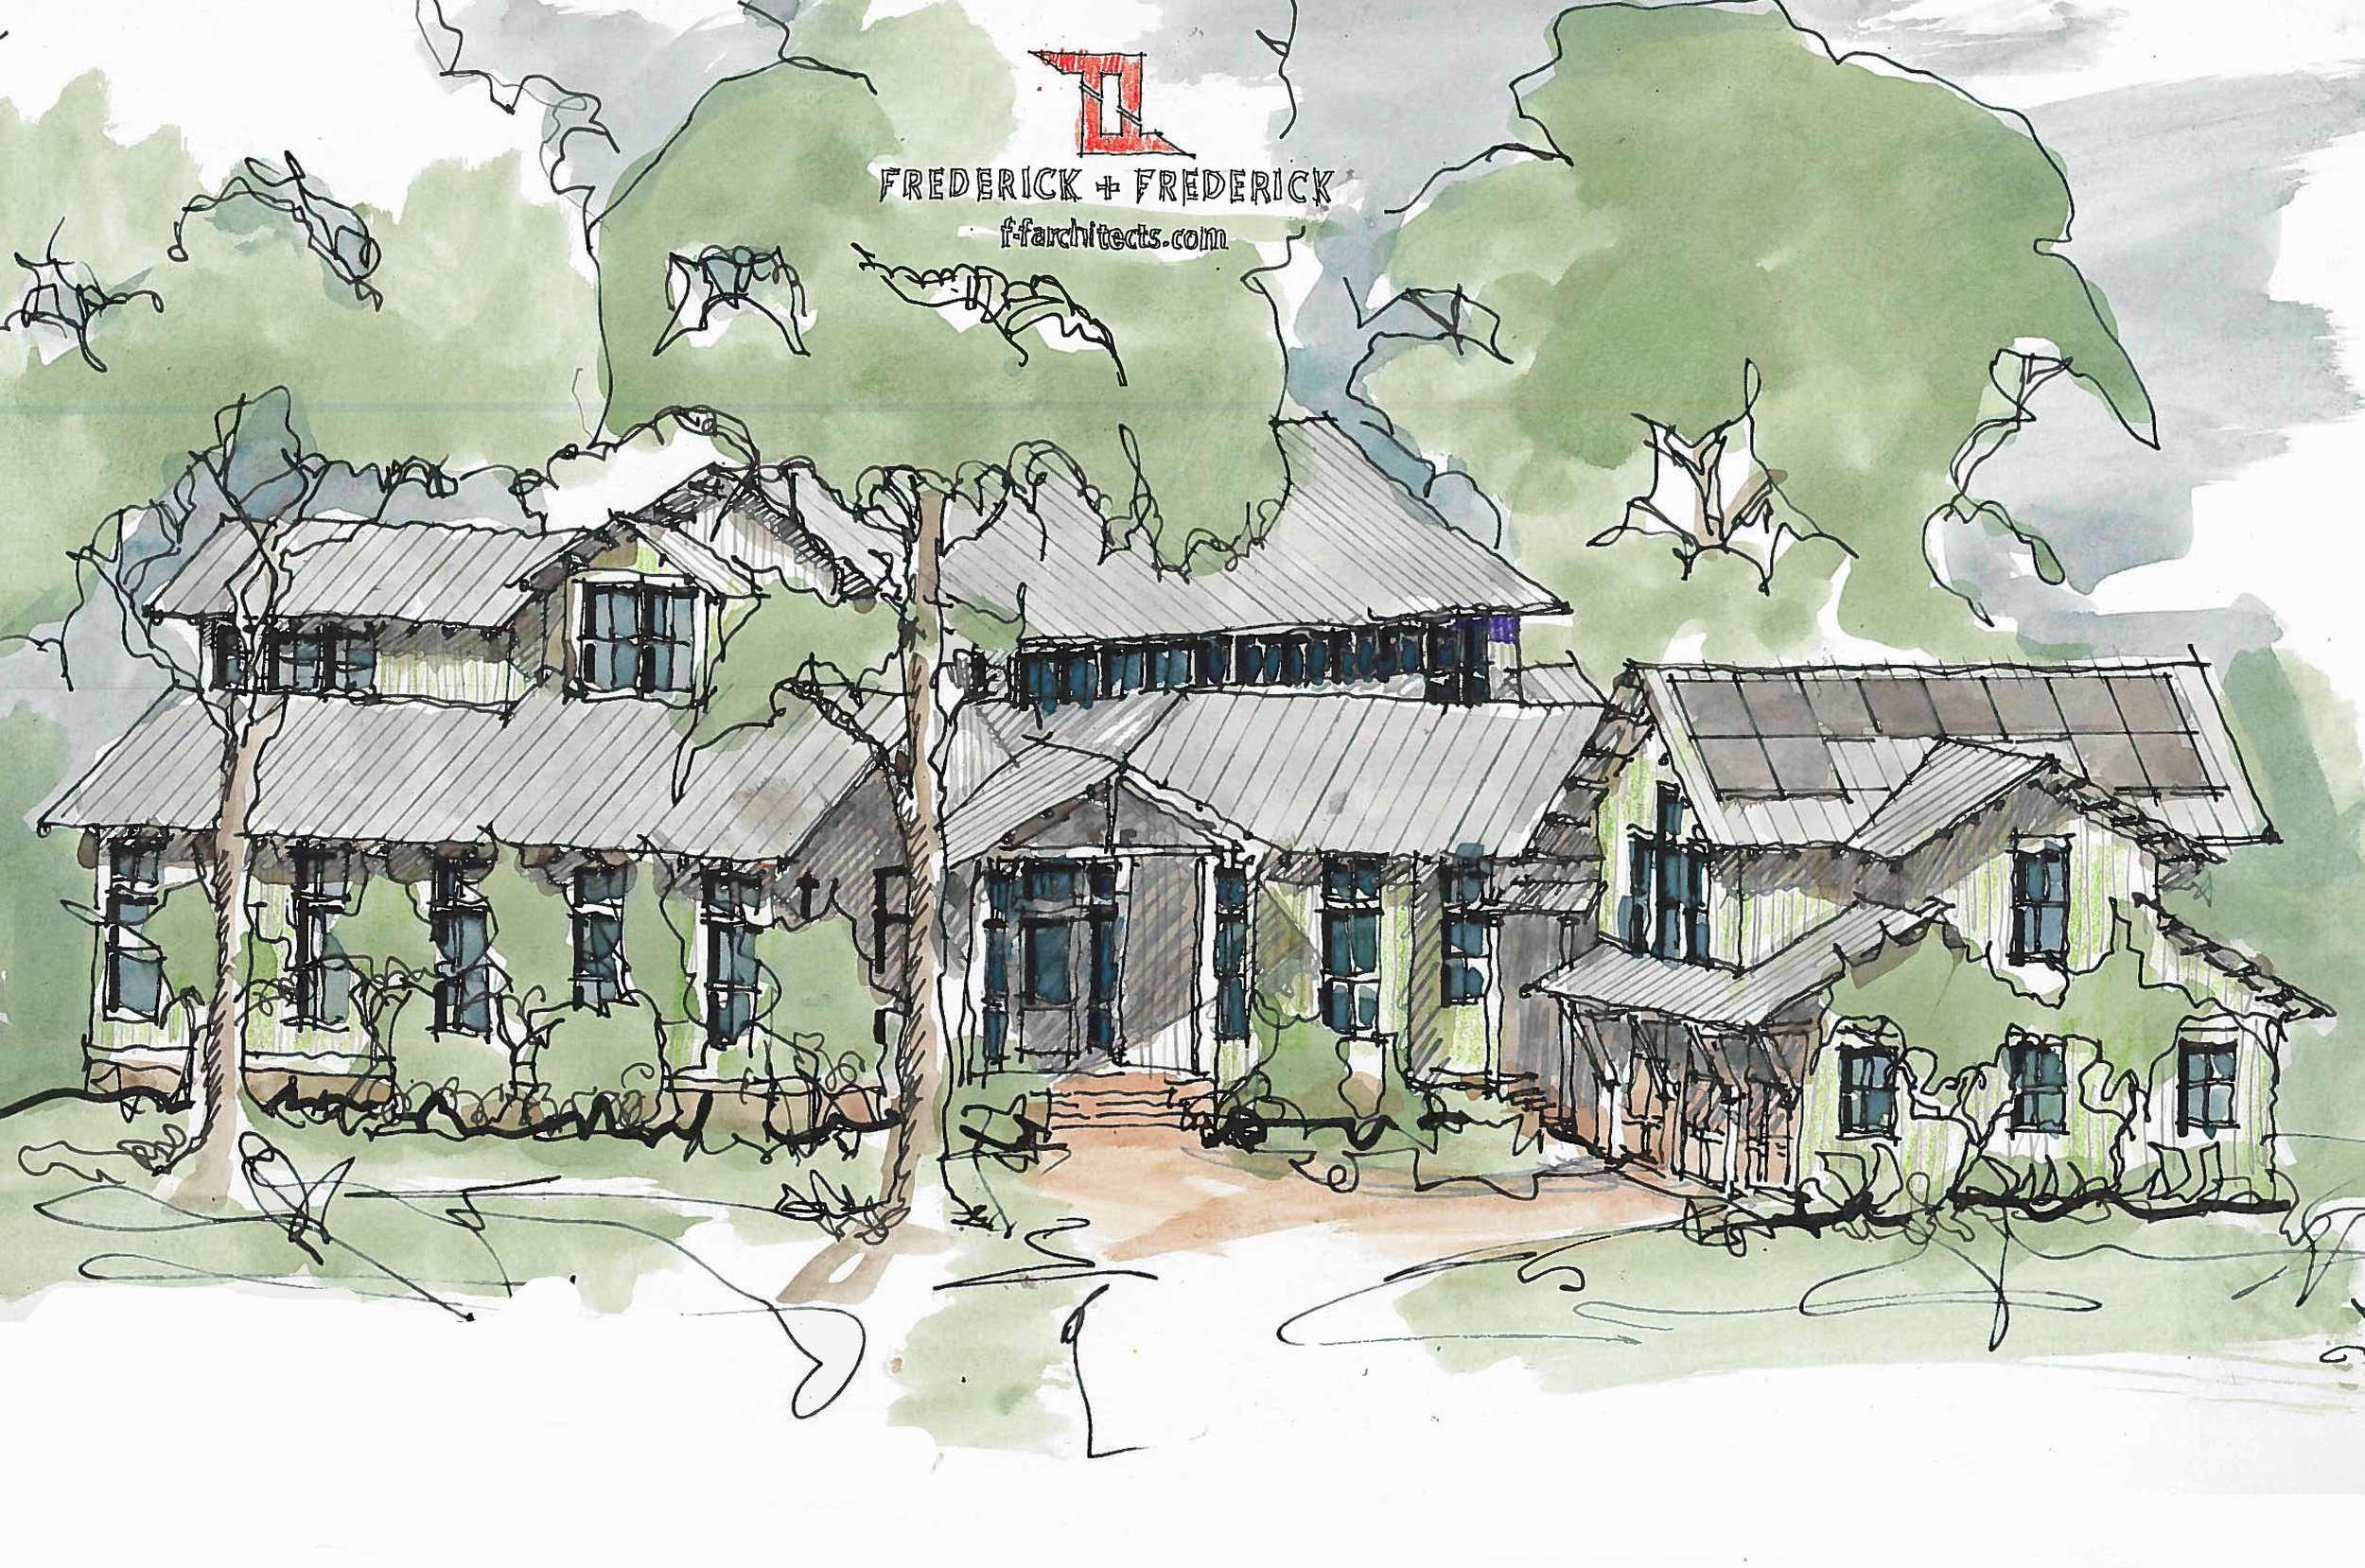  Here's a sketch with the carriage house shown. 